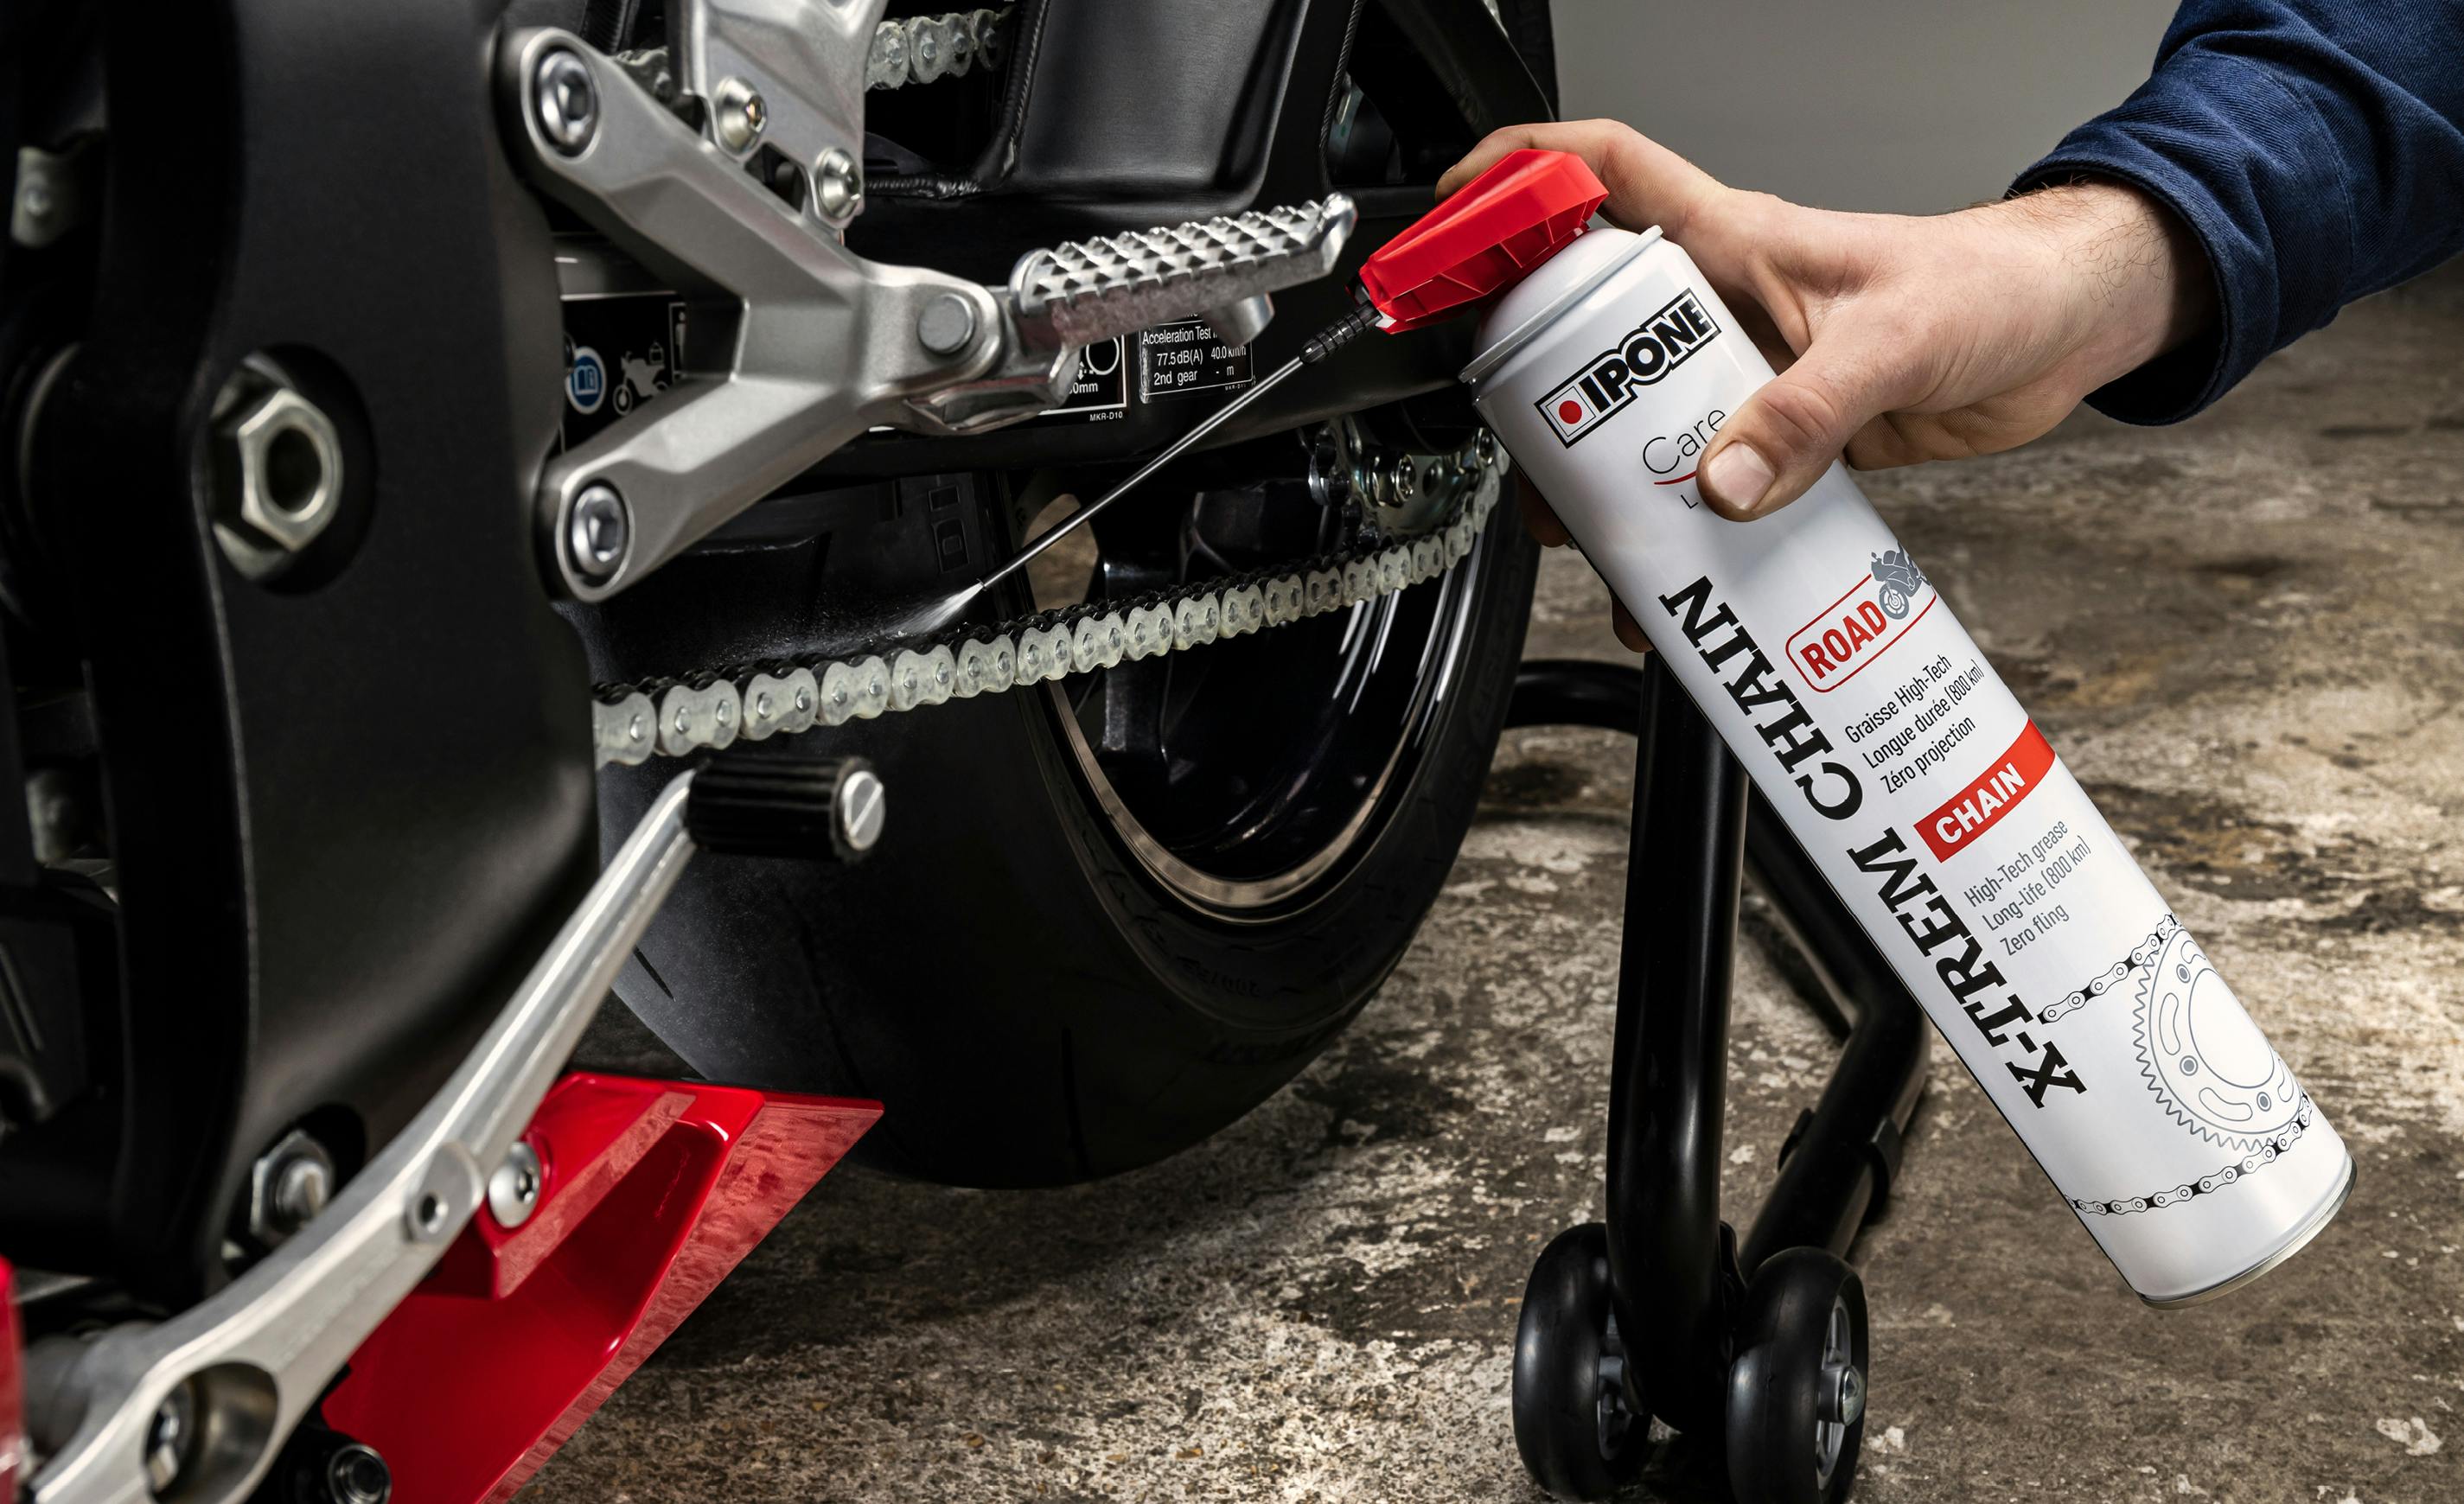 How to successfully clean and lube your motorcycle chain in 5 minutes